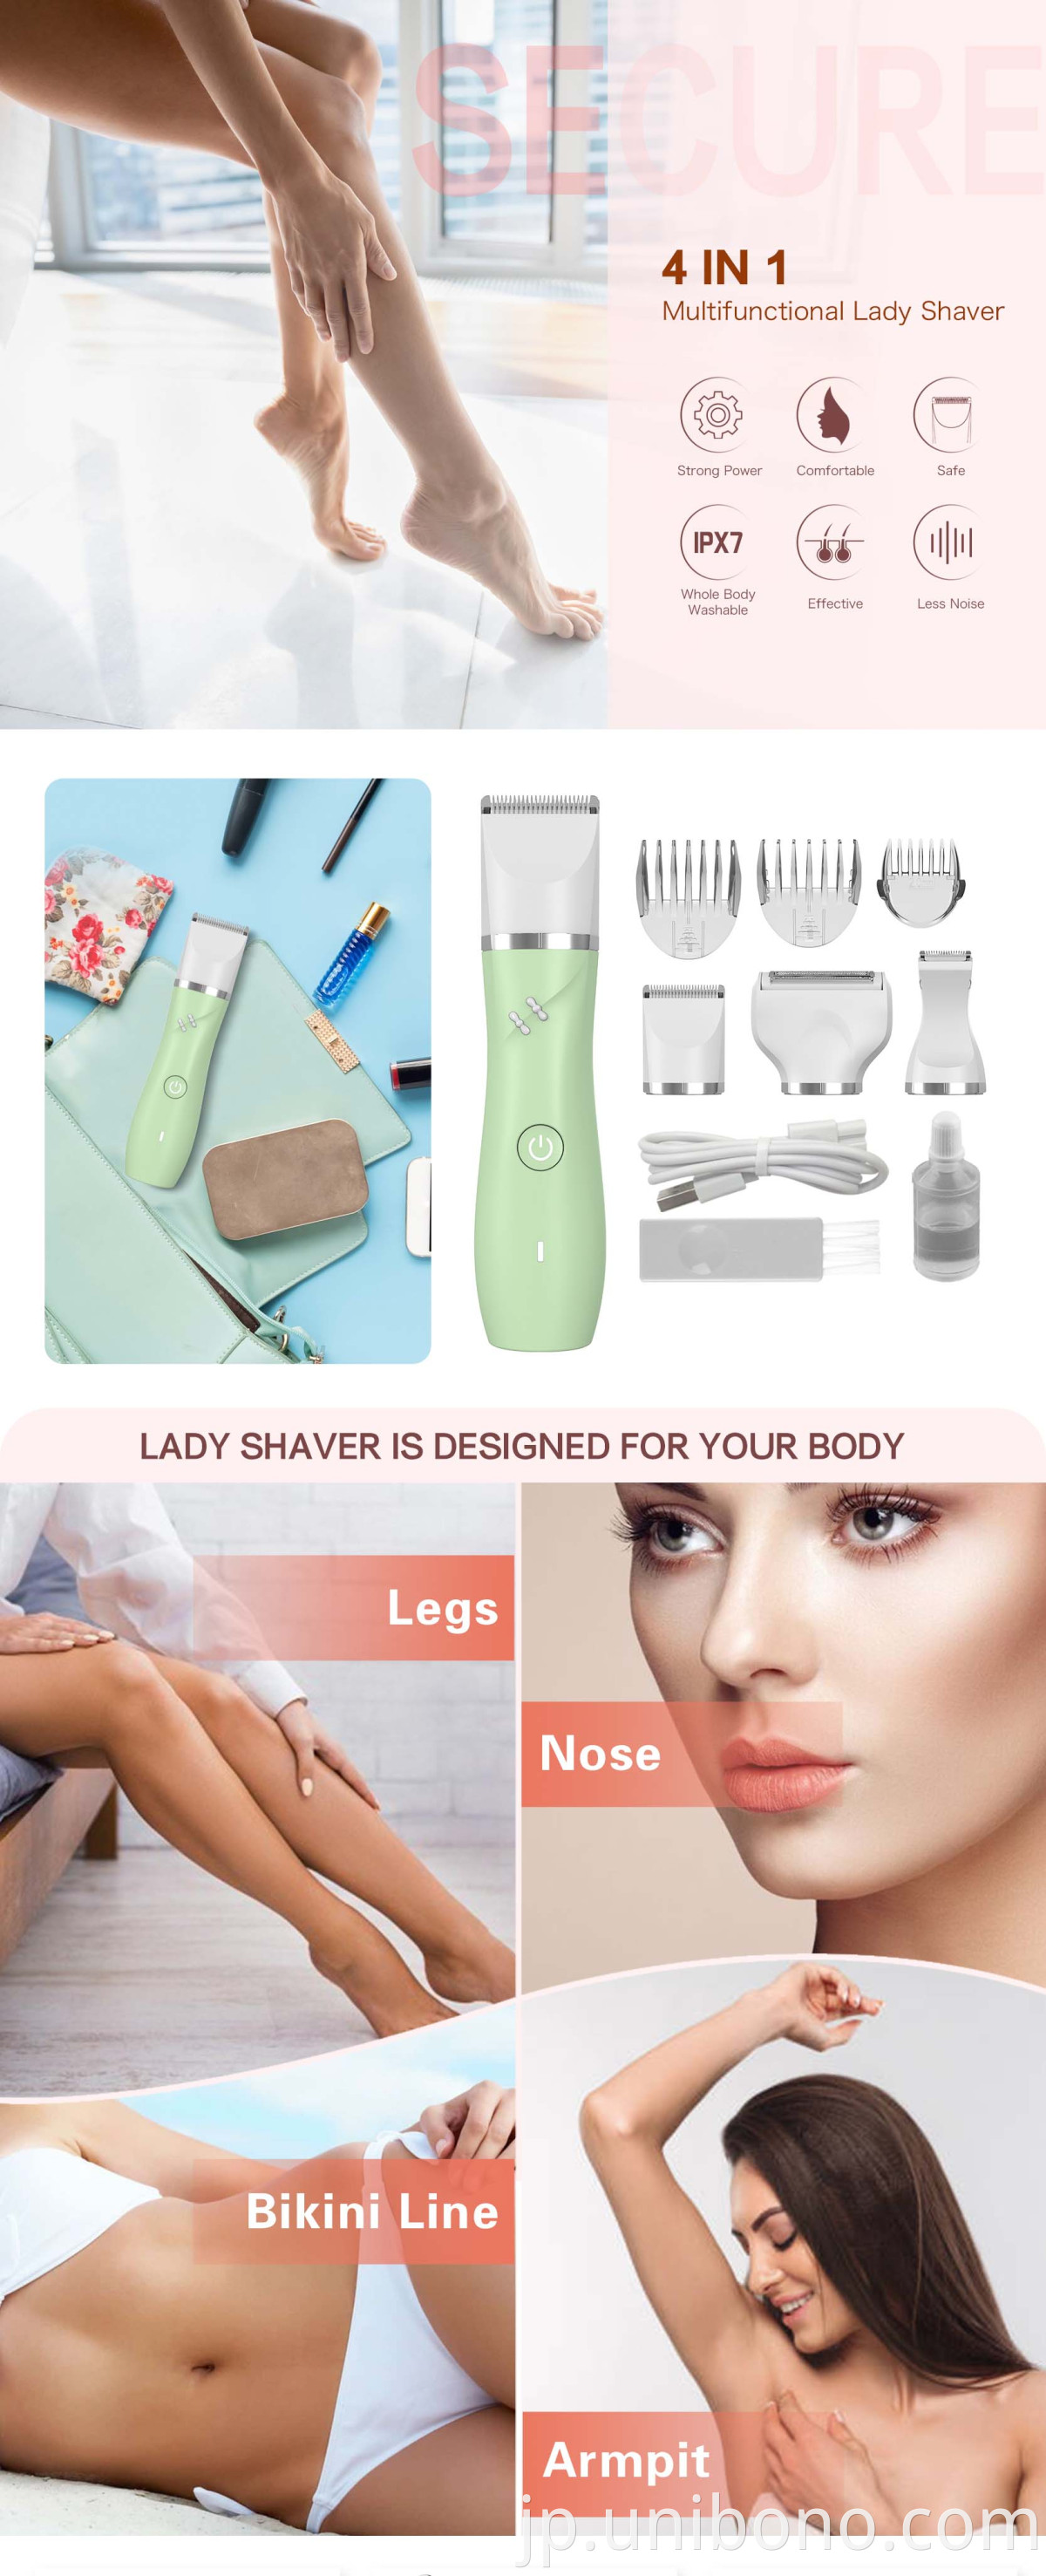 Lady Shaver For Intimate Areas